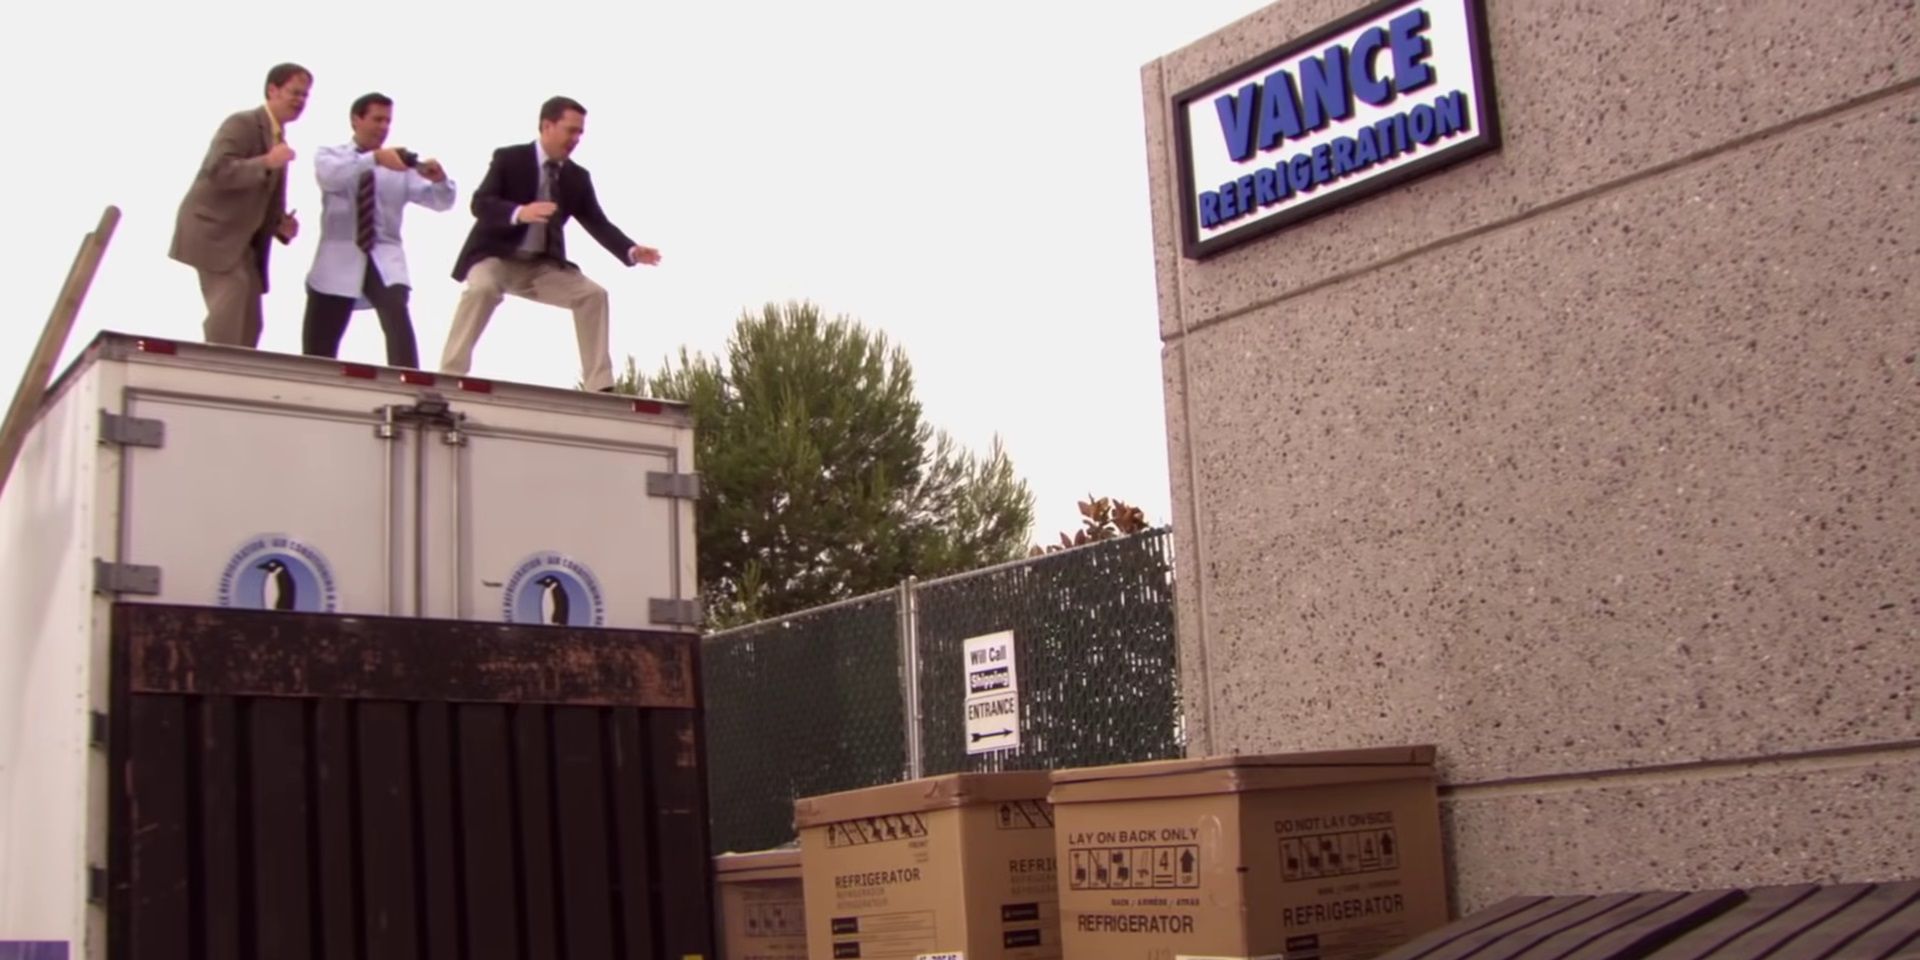 Andy, Michael, and Dwight doing parkour in The Office